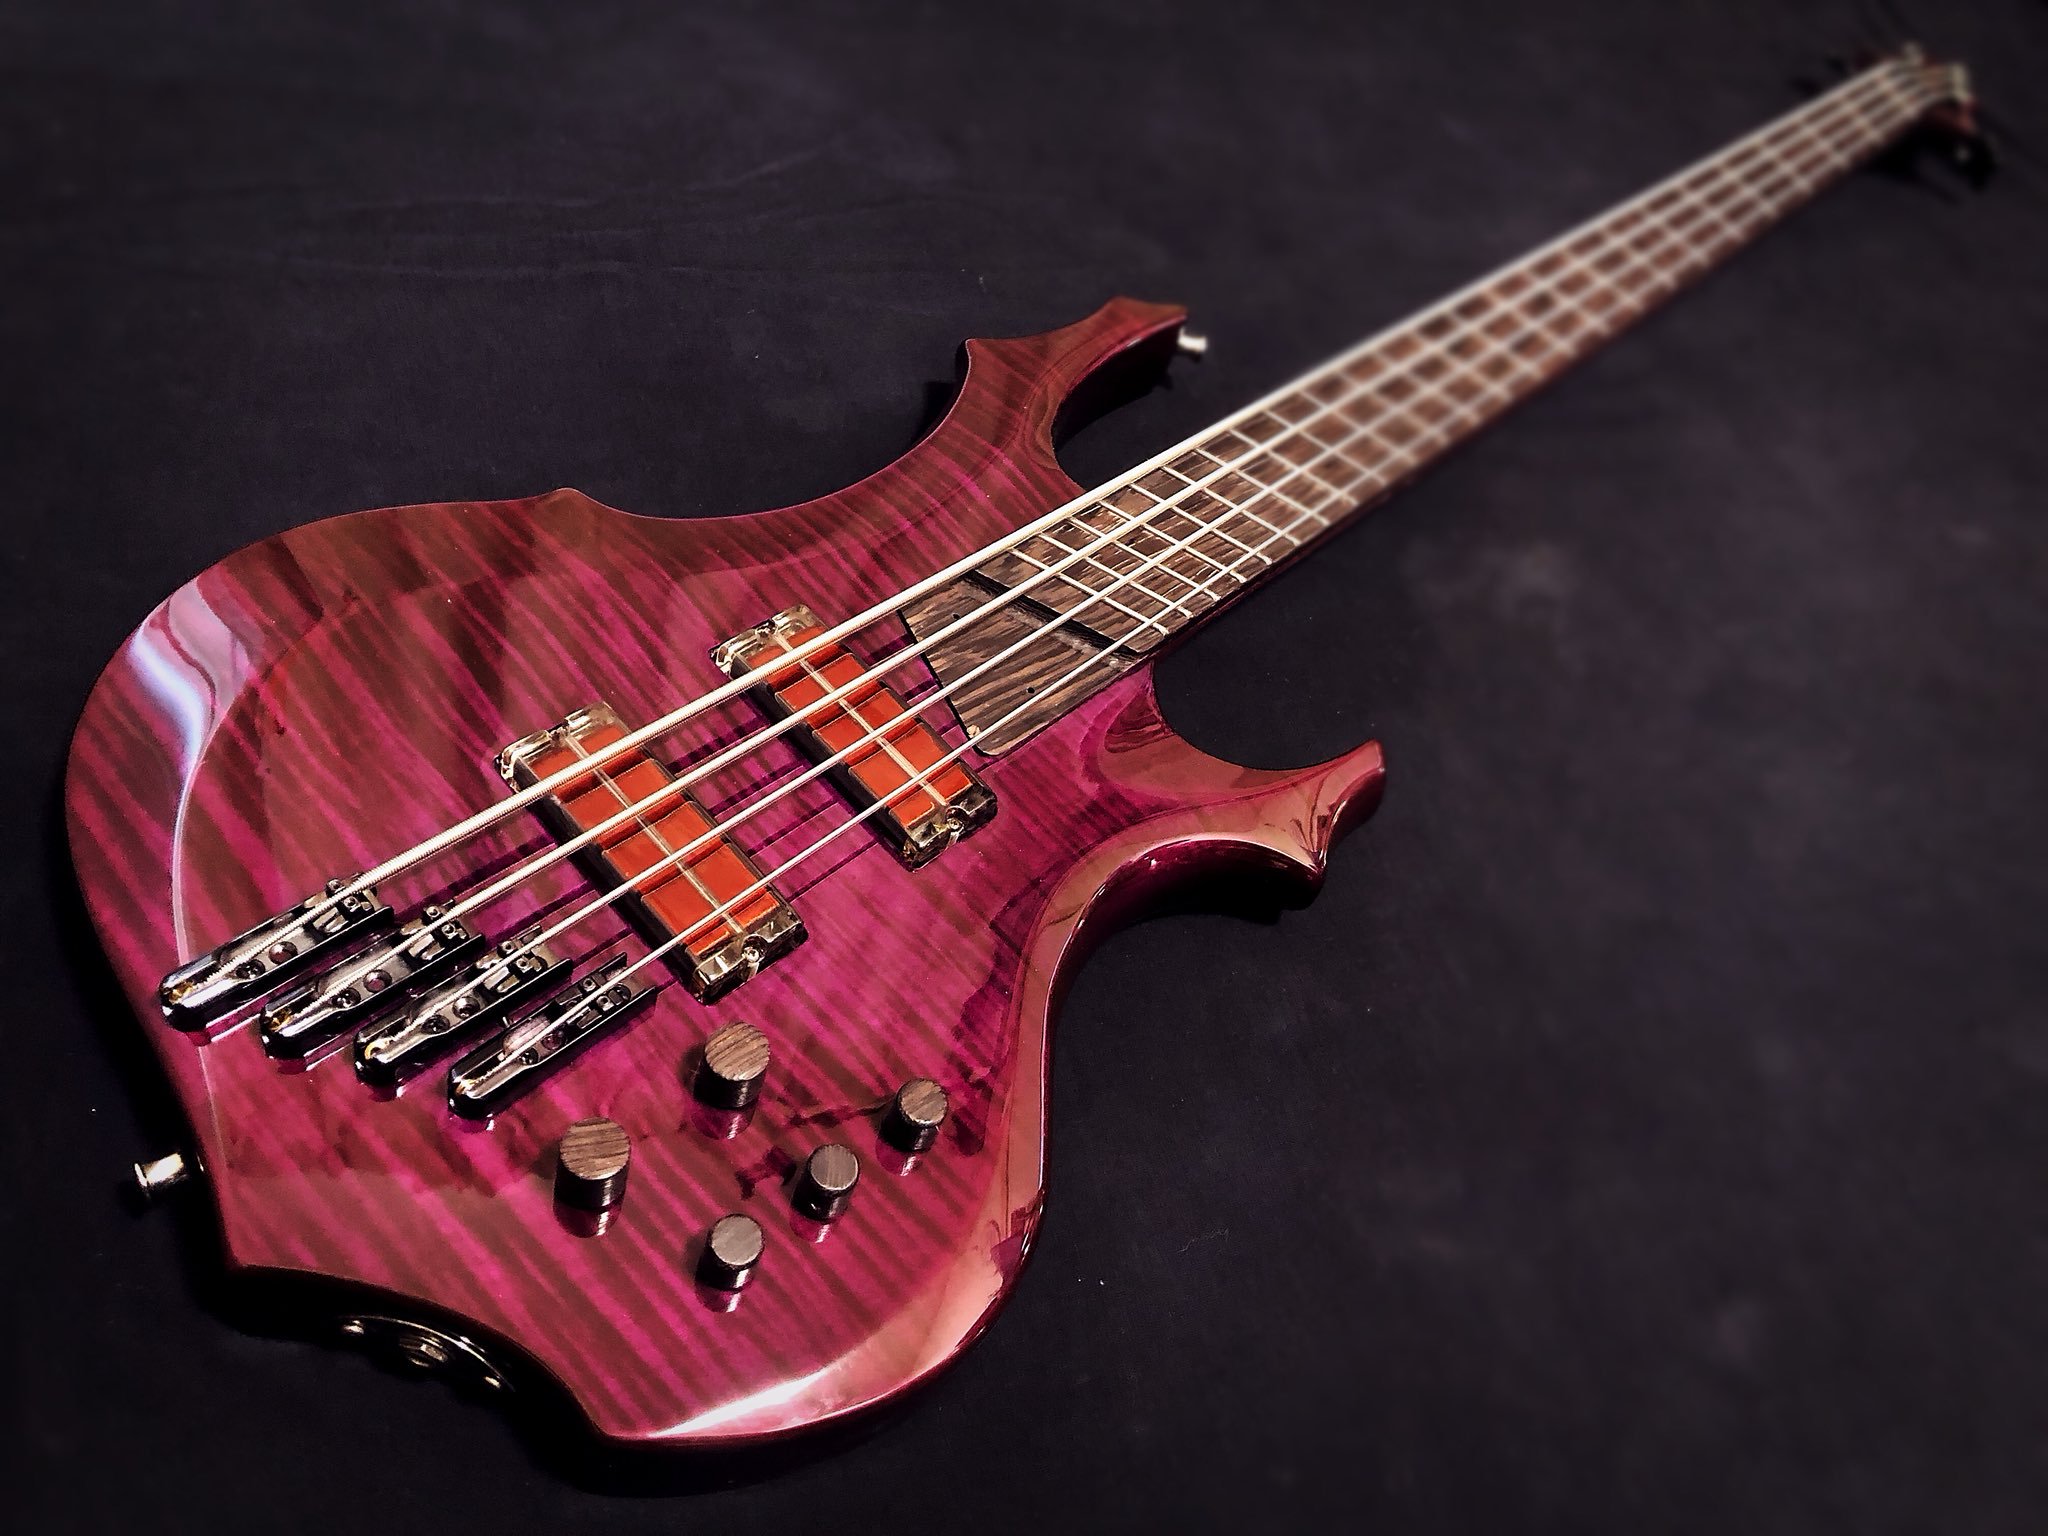 Awesome bass made by Go Takigawa equipped with q-tuner pickups